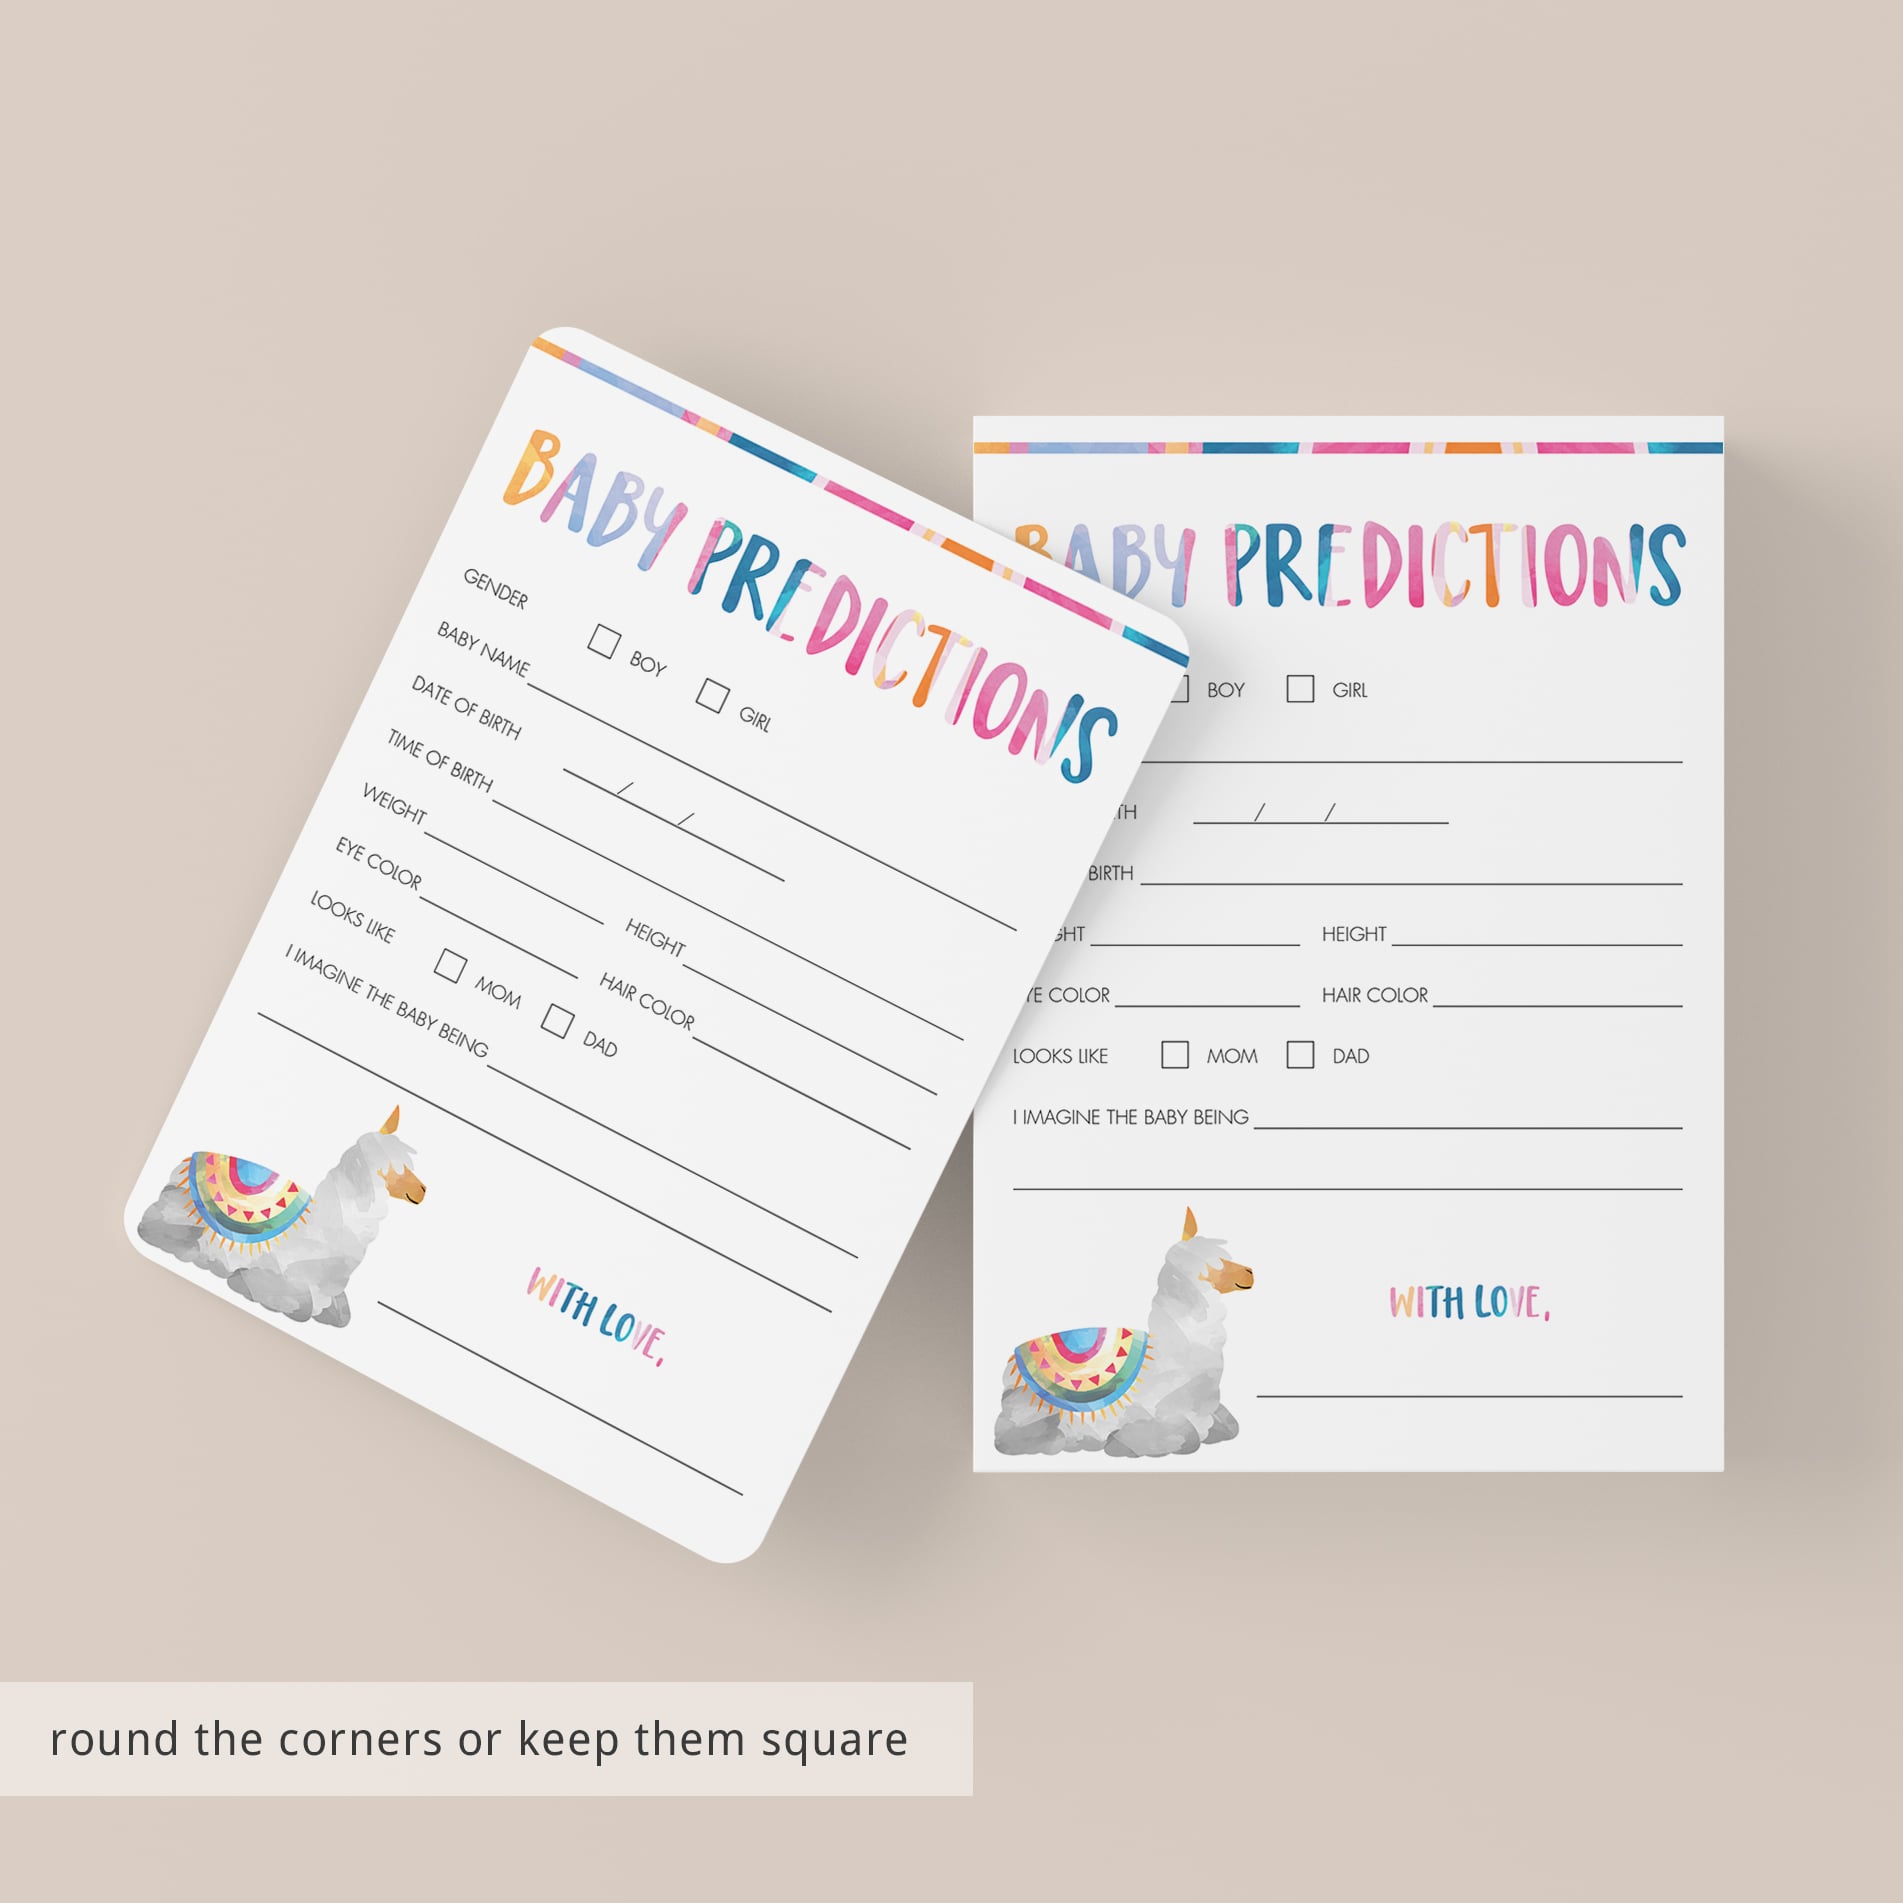 Baby predictions cards for llama baby shower by LittleSizzle